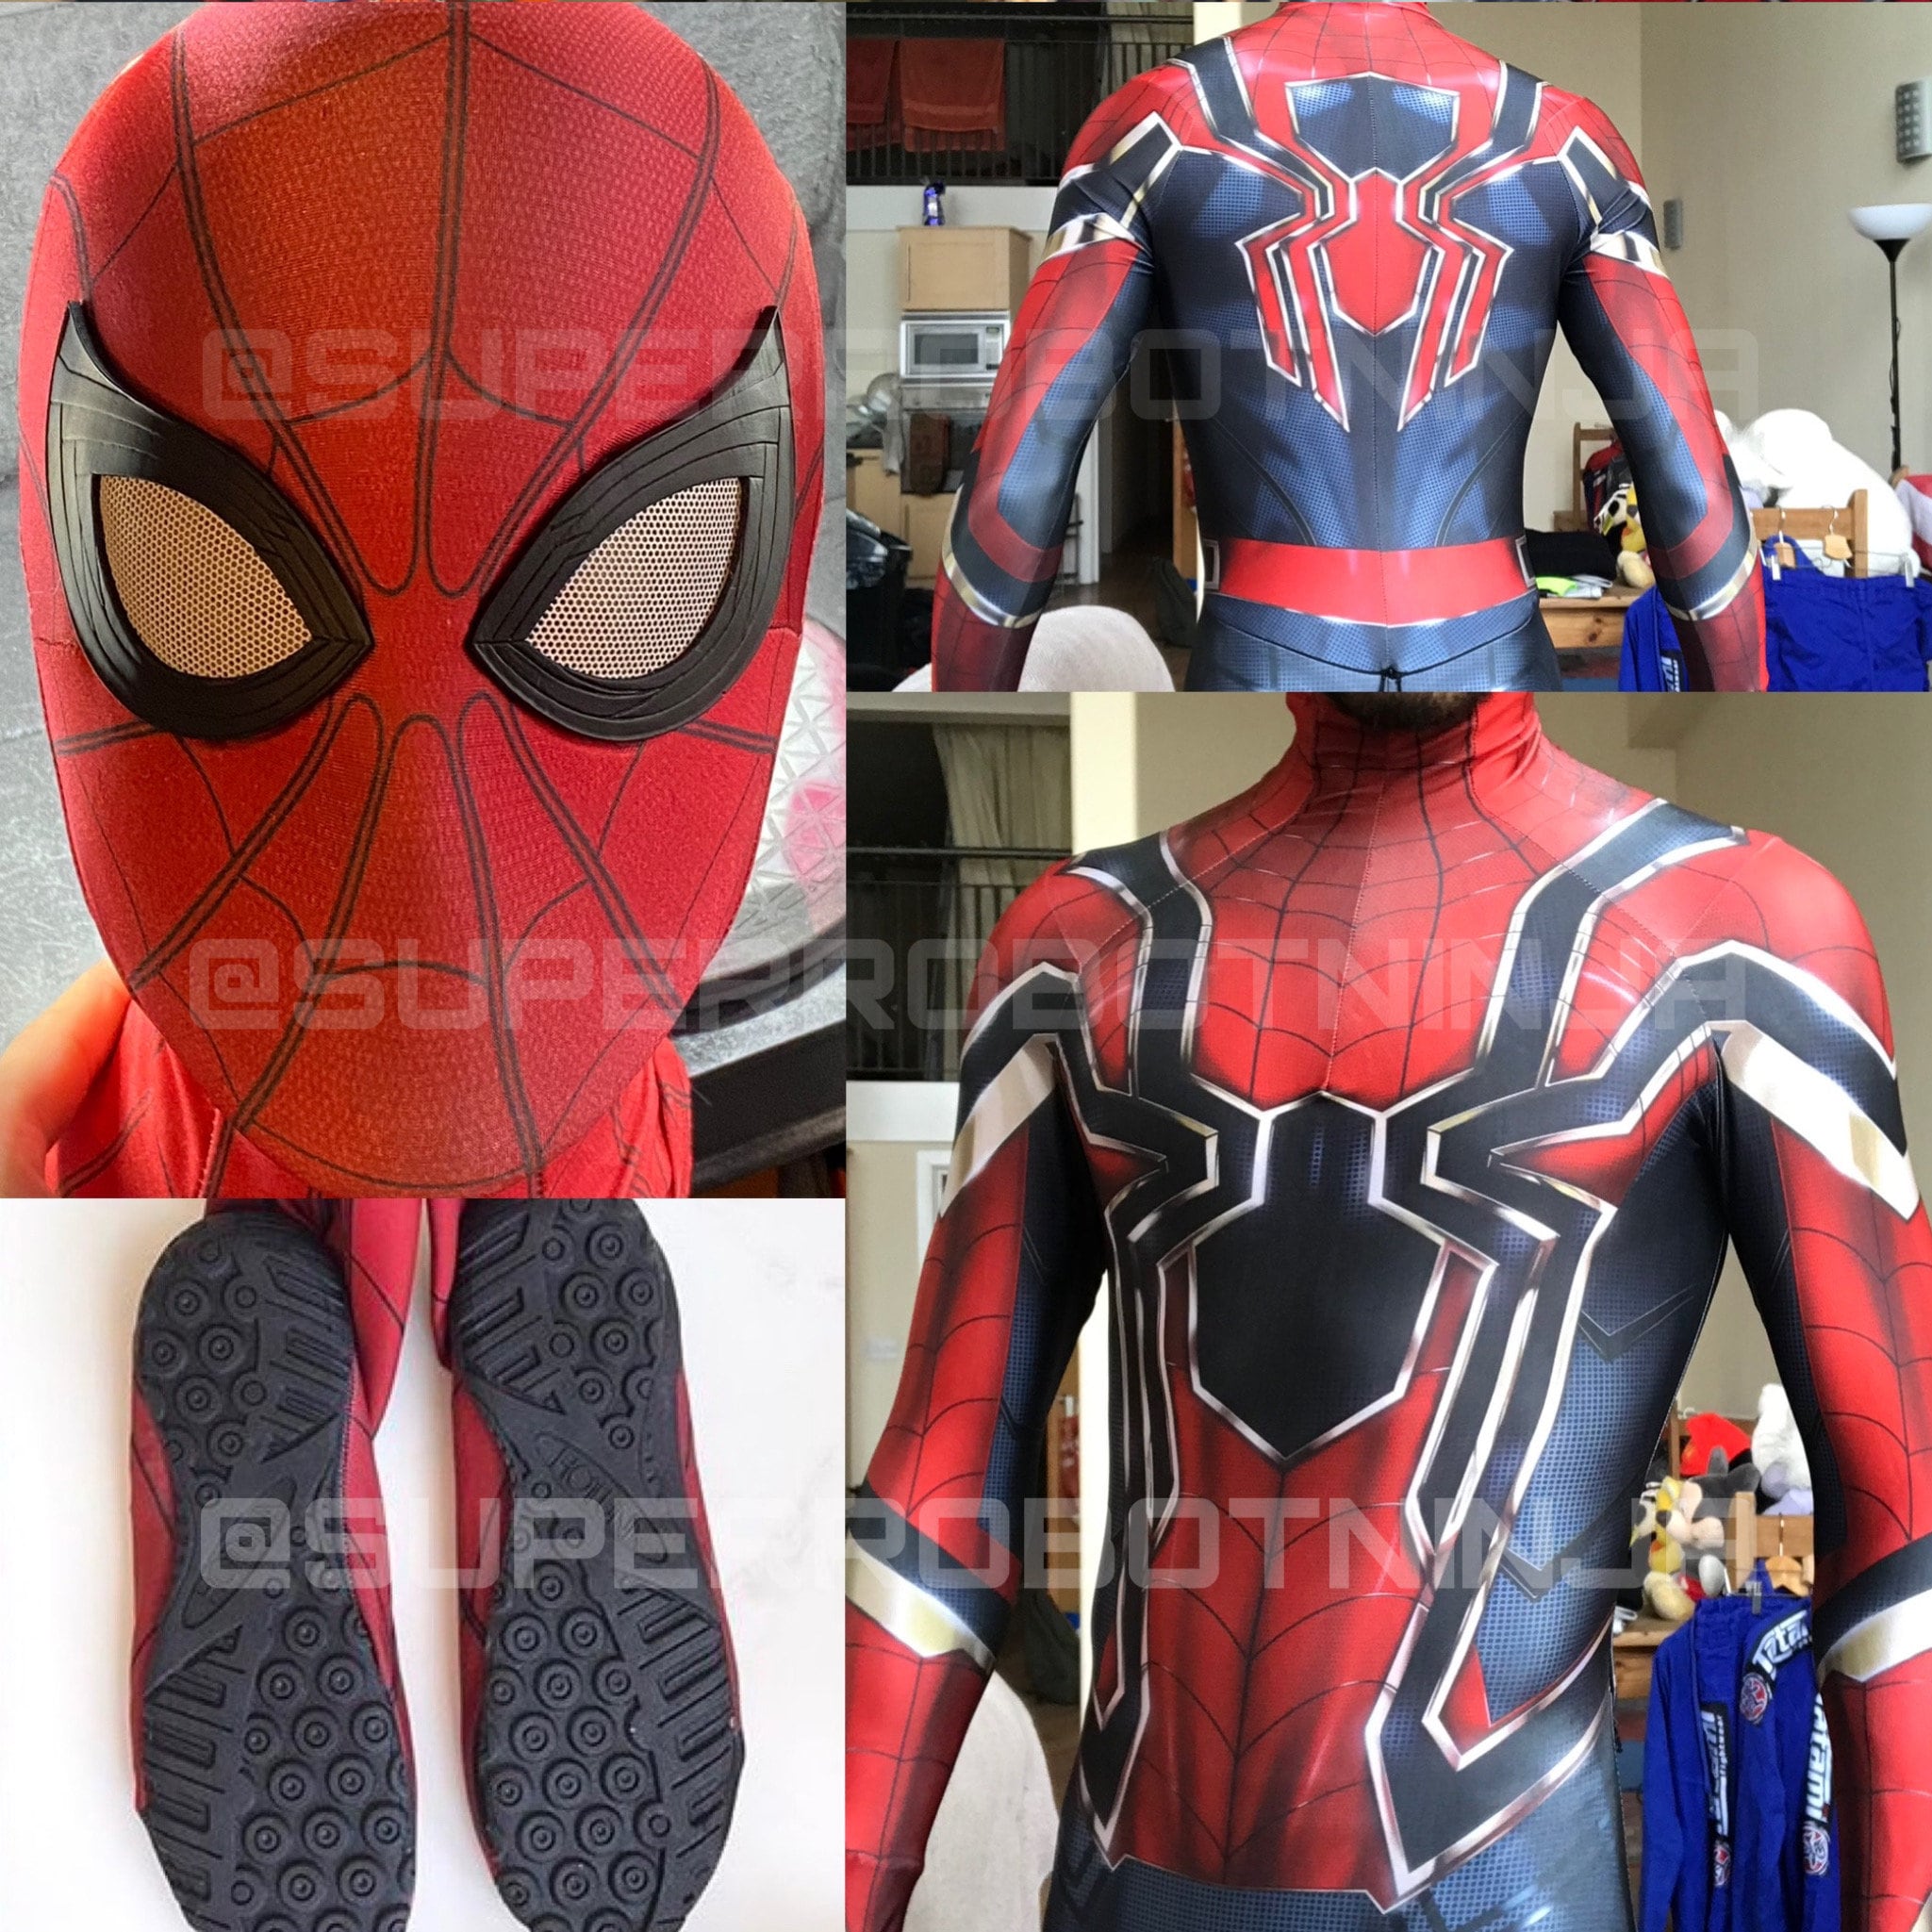 Buy Premium SpiderMan Action Figure with LED in Iron Spider Costume Online  at Low Prices in India - Amazon.in